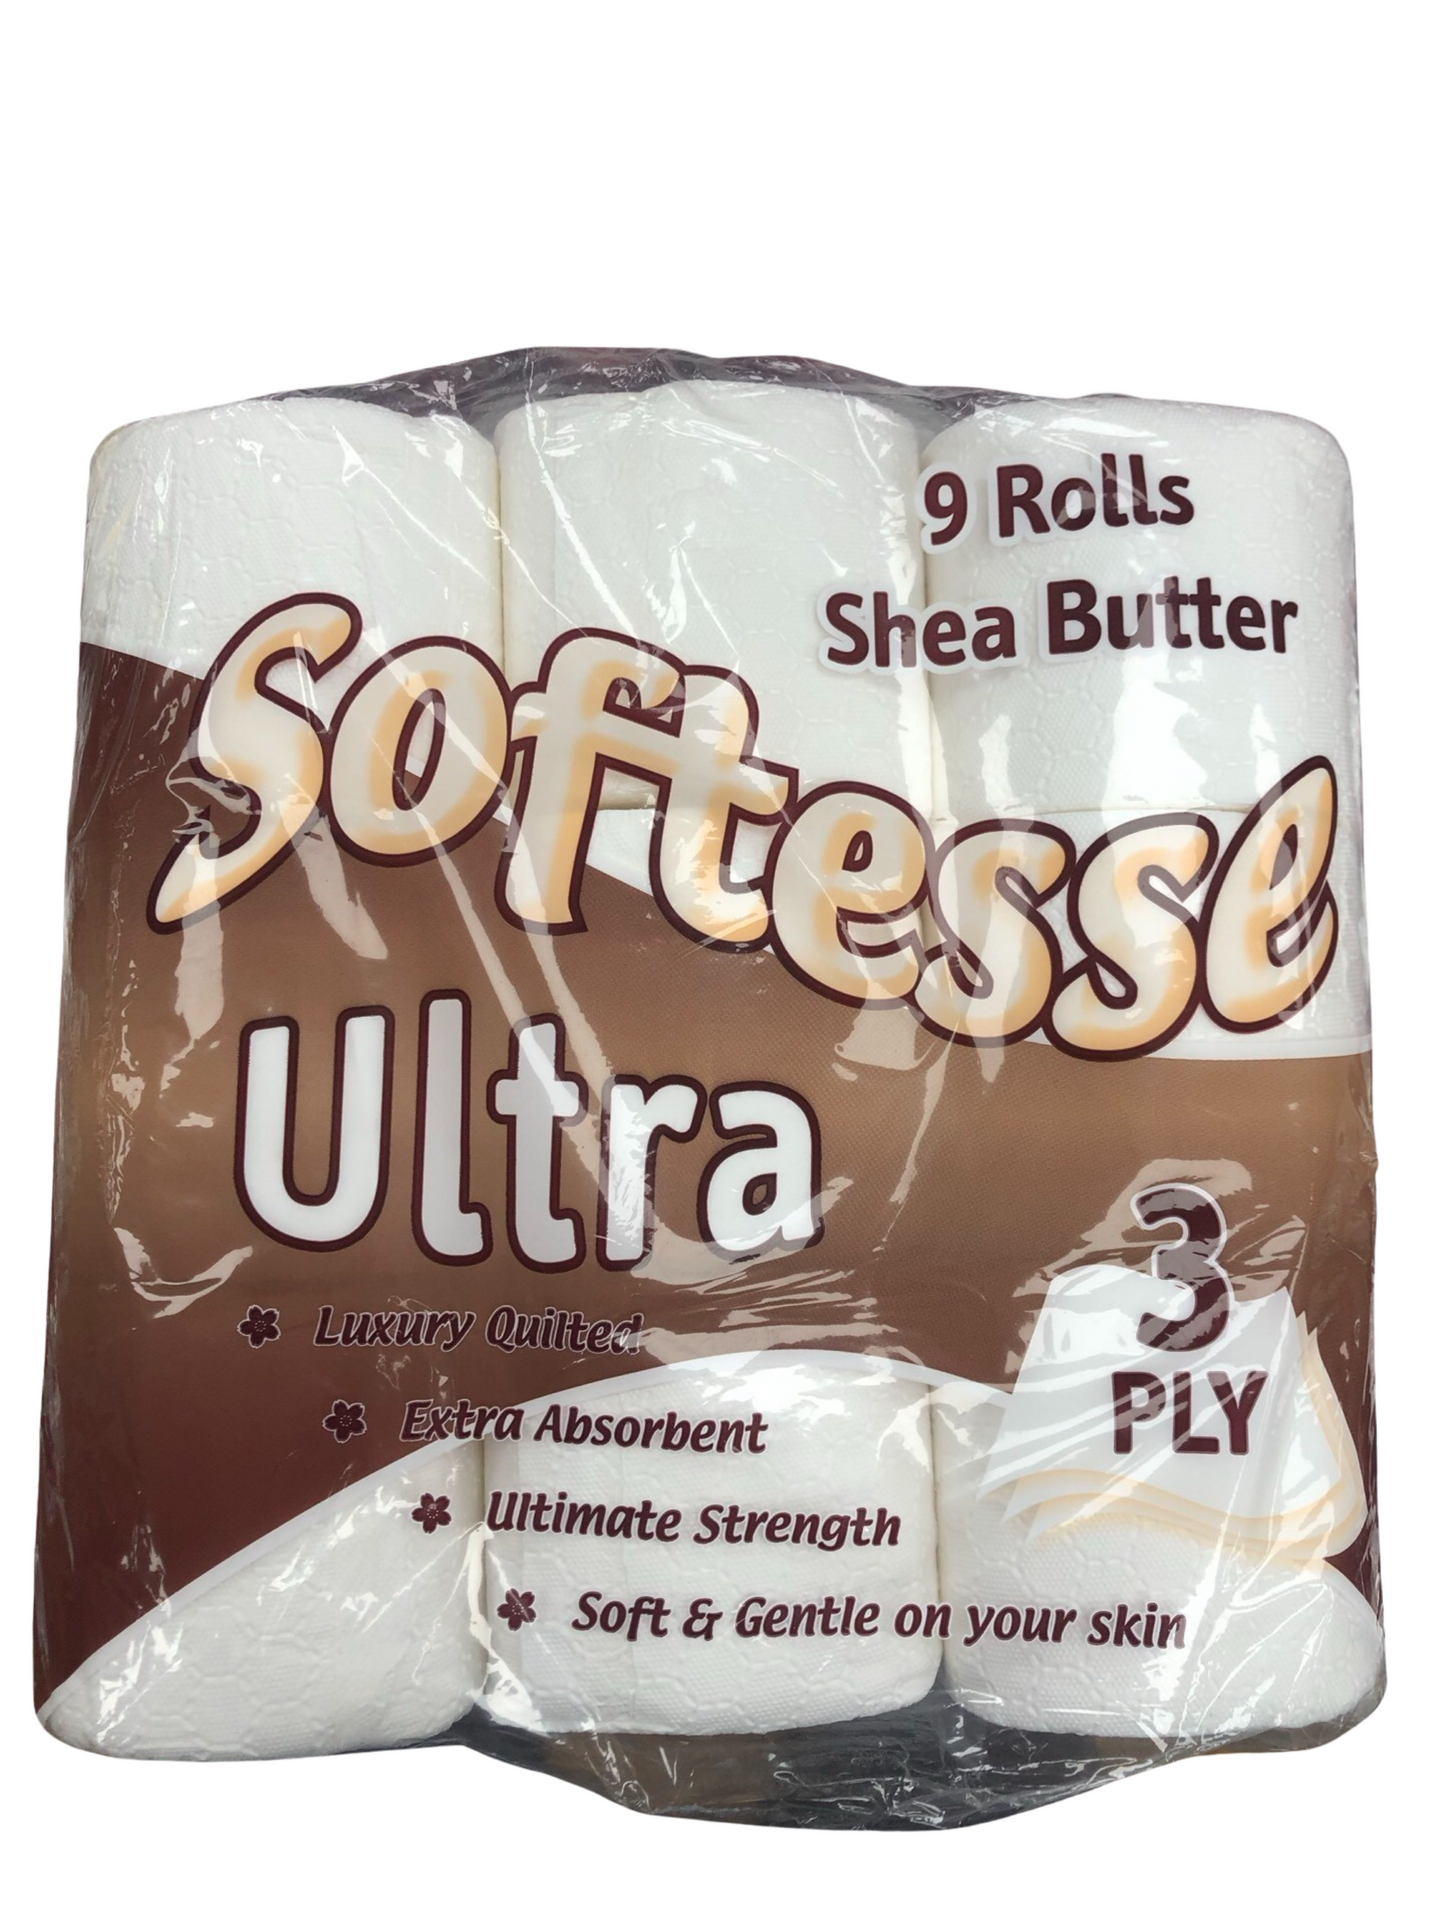 Softesse Ultra quilted luxury toilet roll 9 rolls Shea butter scented